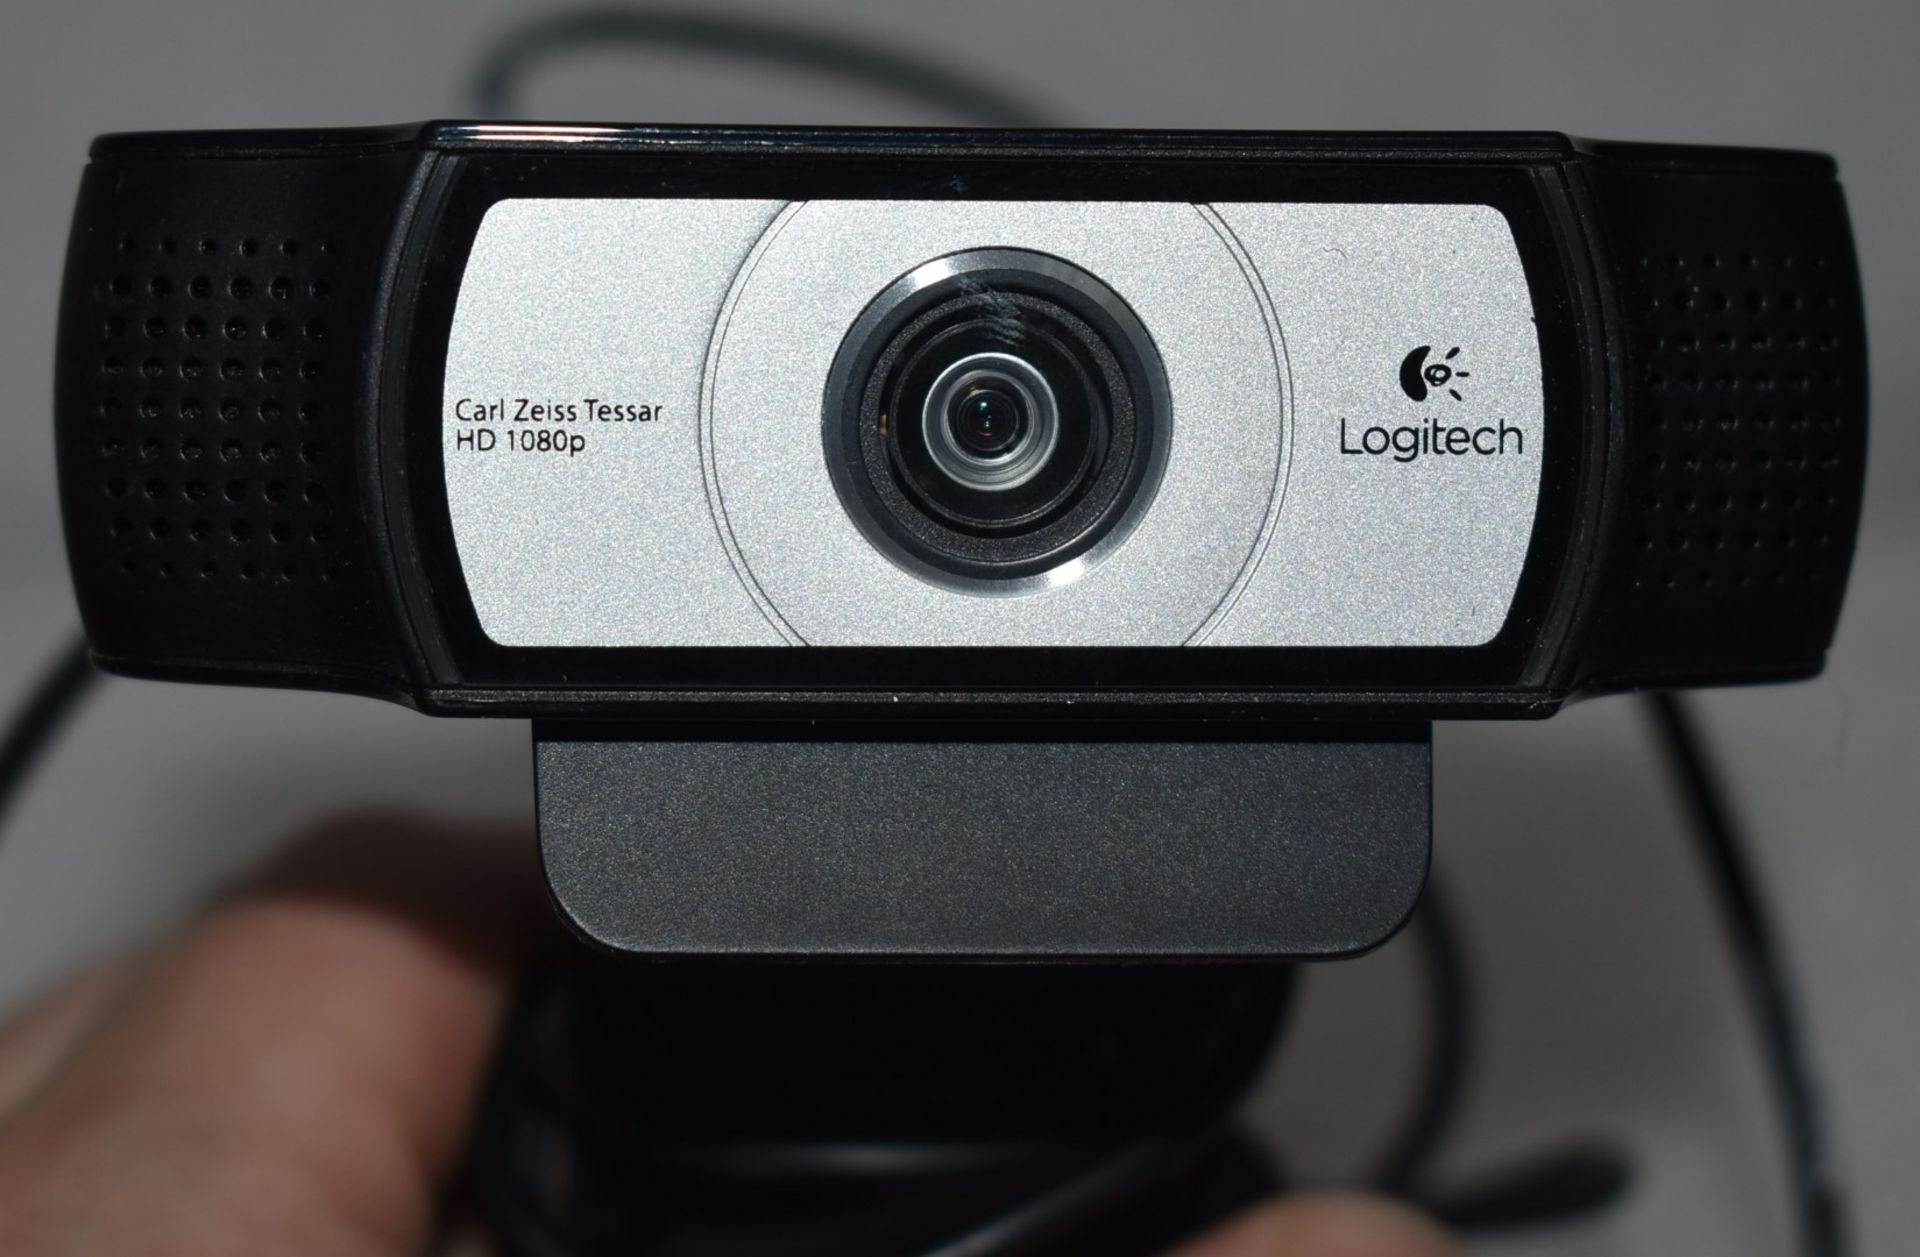 1 x Logitech C930e 1080p HD Web Cam With USB Connector and Mounting Bracket - Ref: MPC247 CB - CL678 - Image 2 of 4